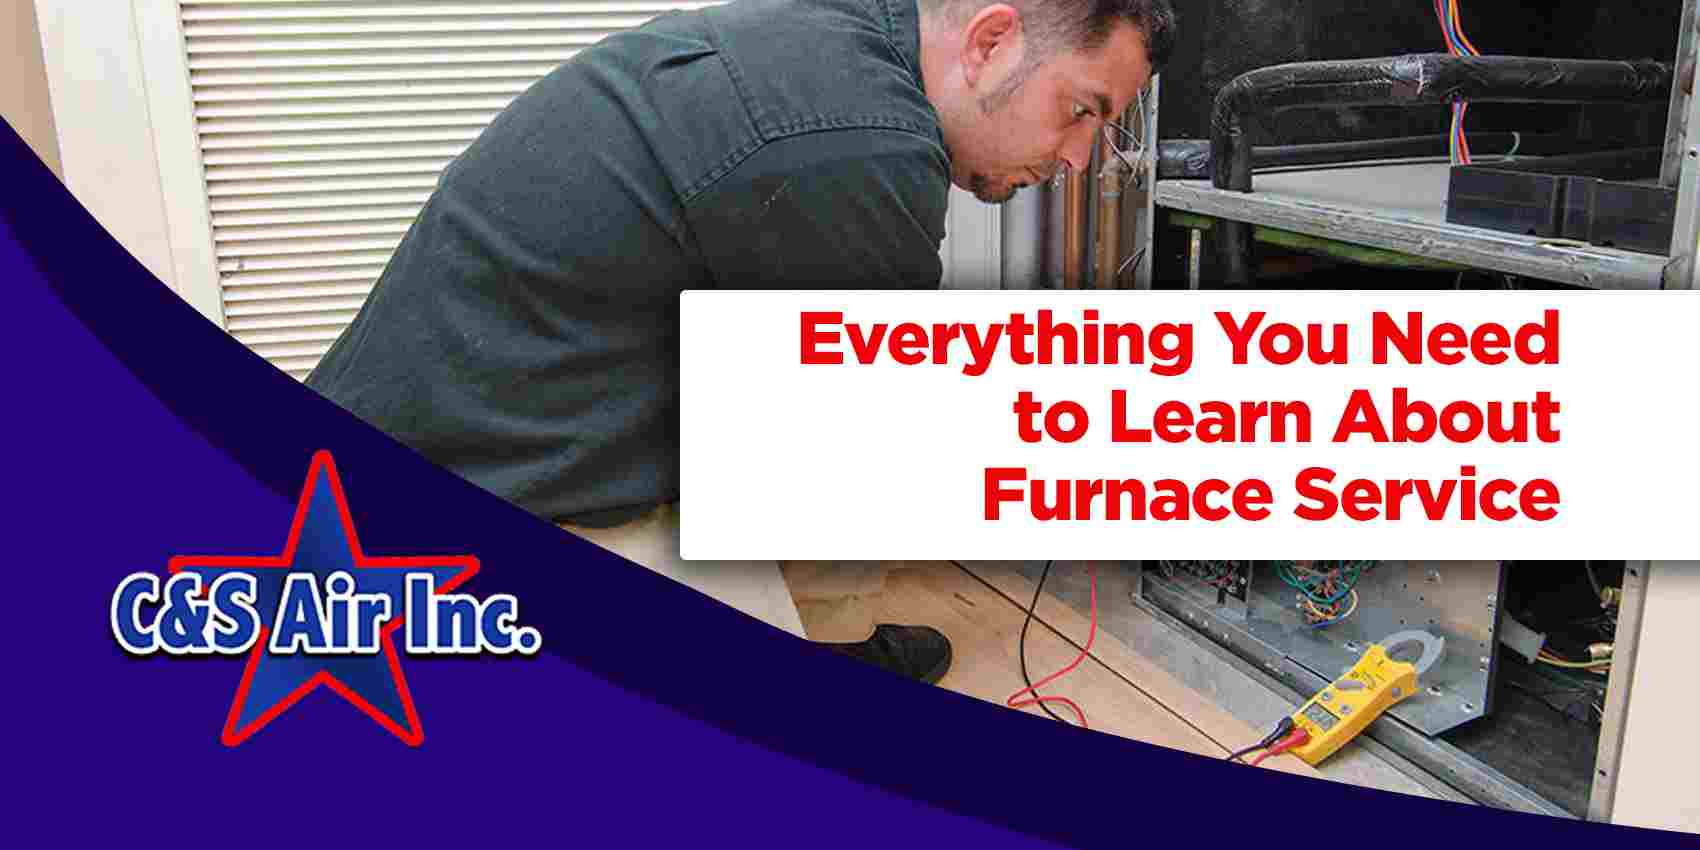 Everything You Need to Learn About Furnace Service